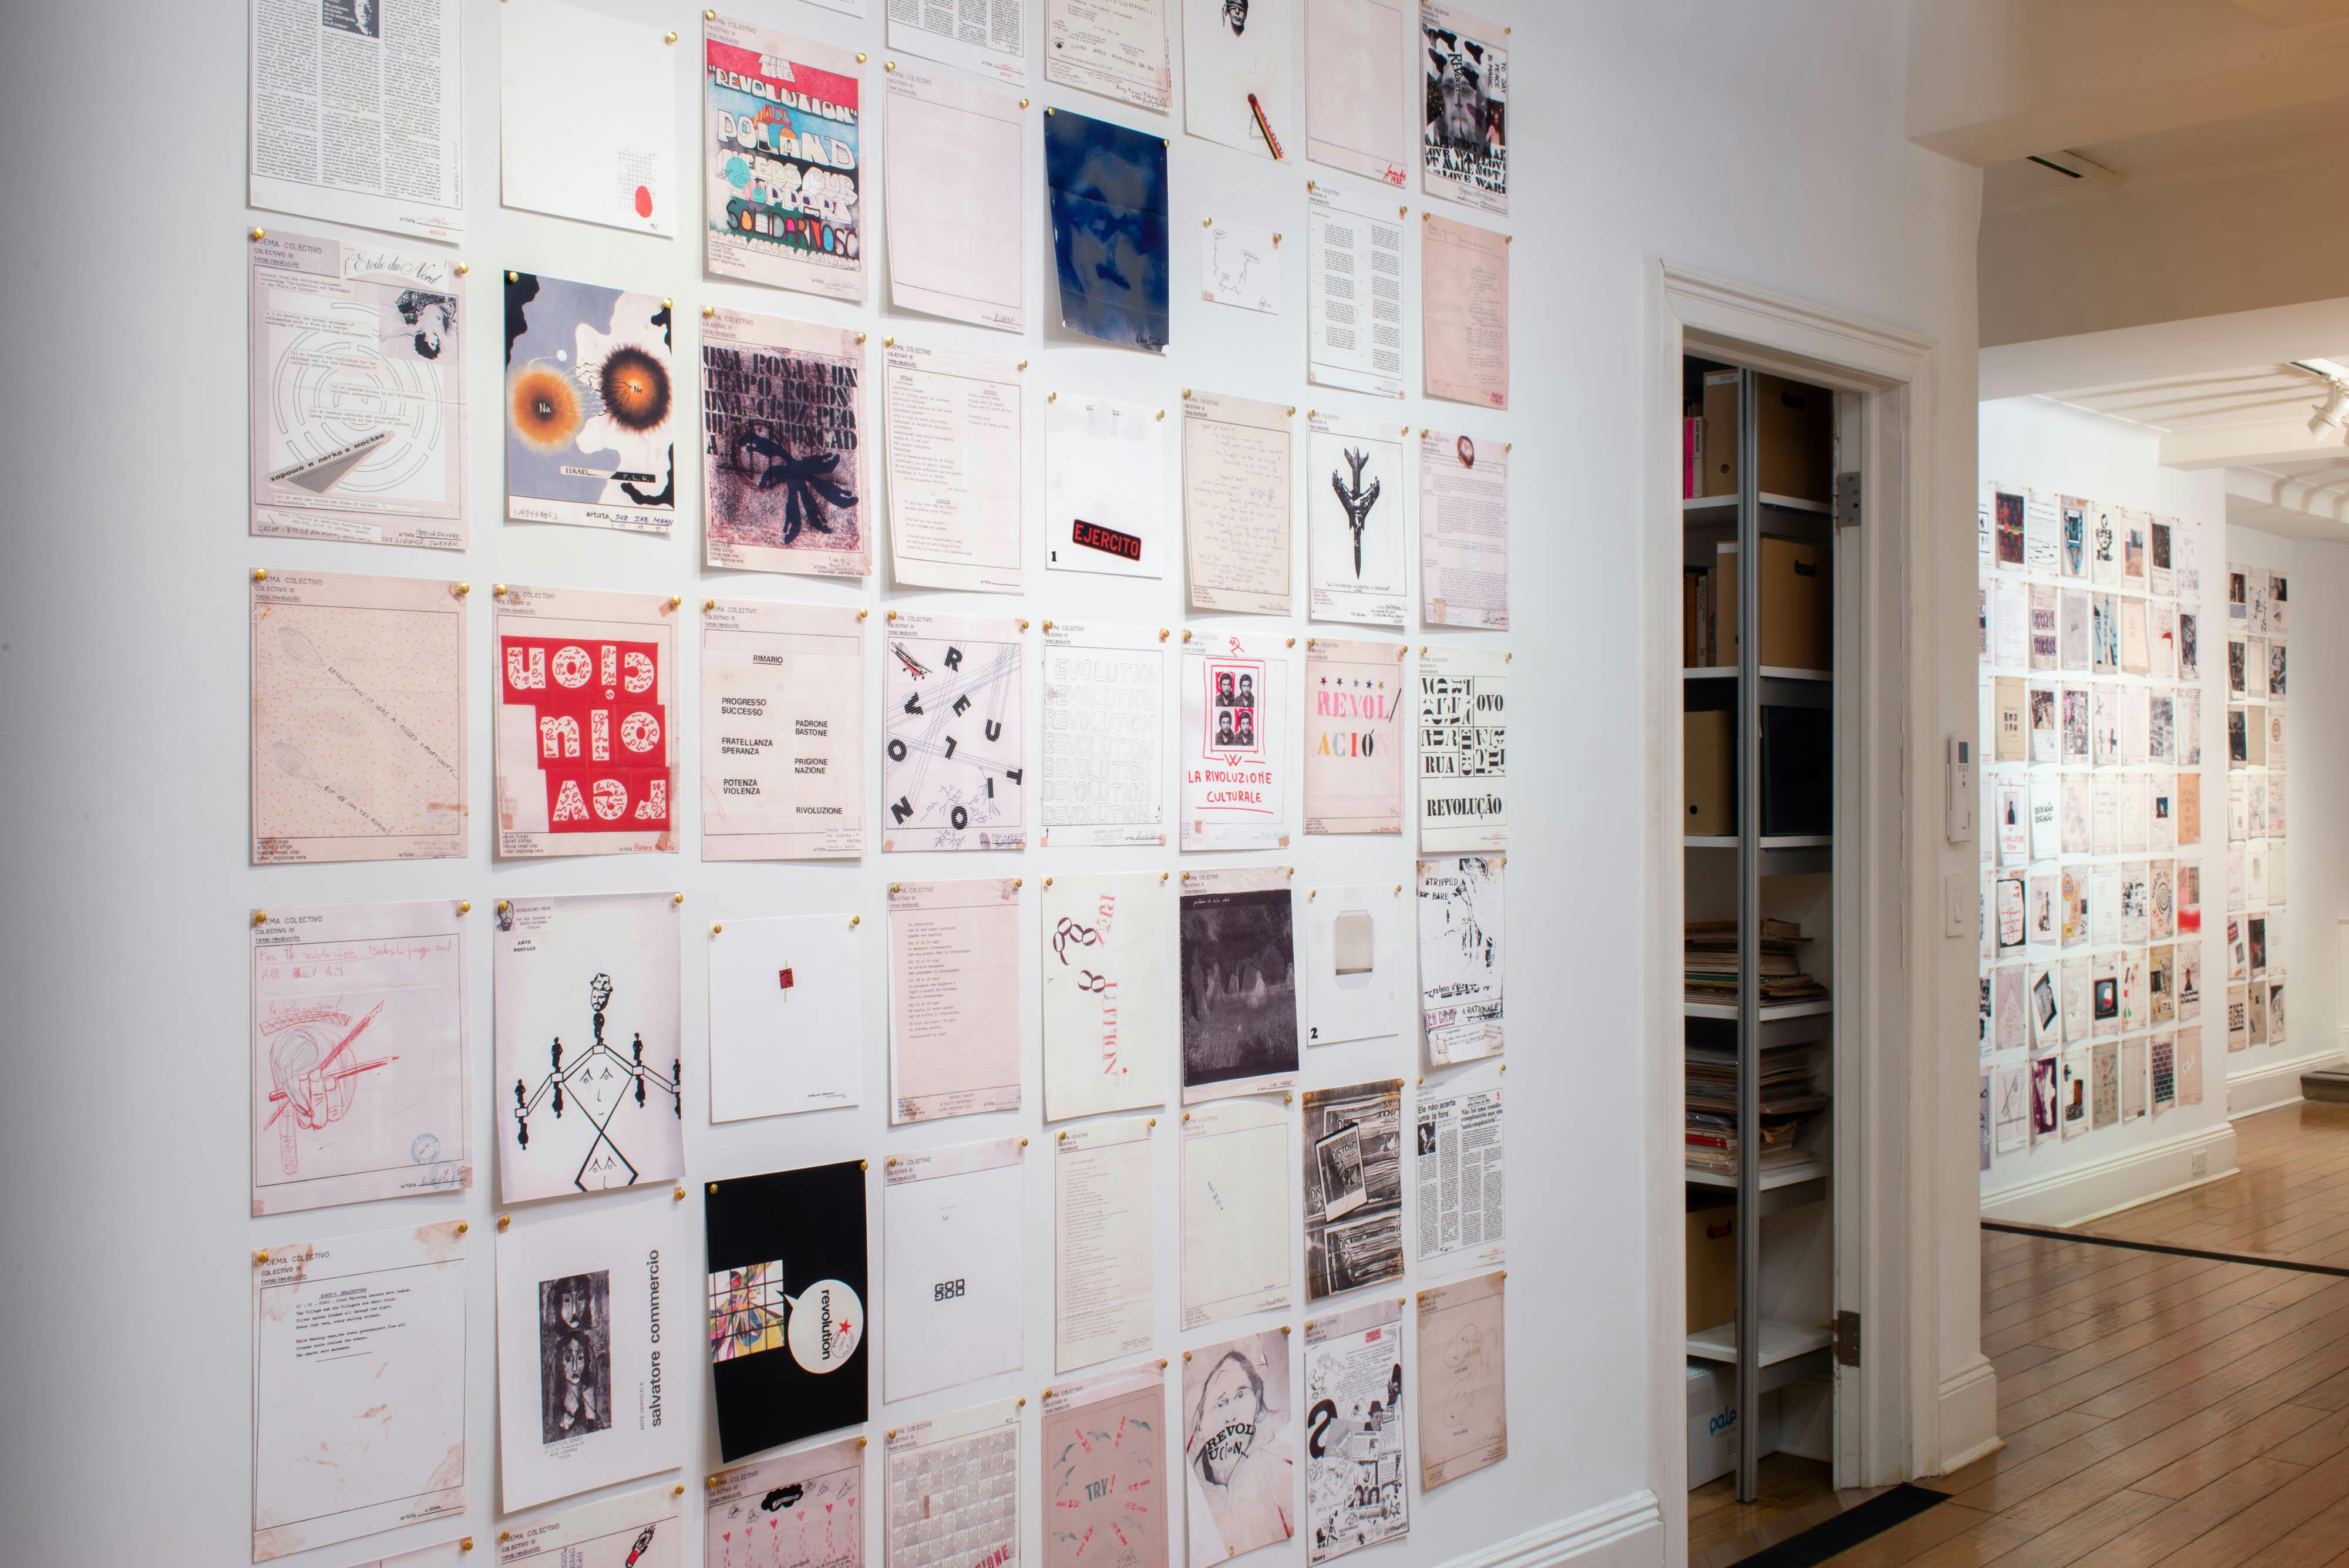 Installation view of Poema Colectivo Revolución exhibition showing collages of the same size arranged in a grid covering the gallery walls.